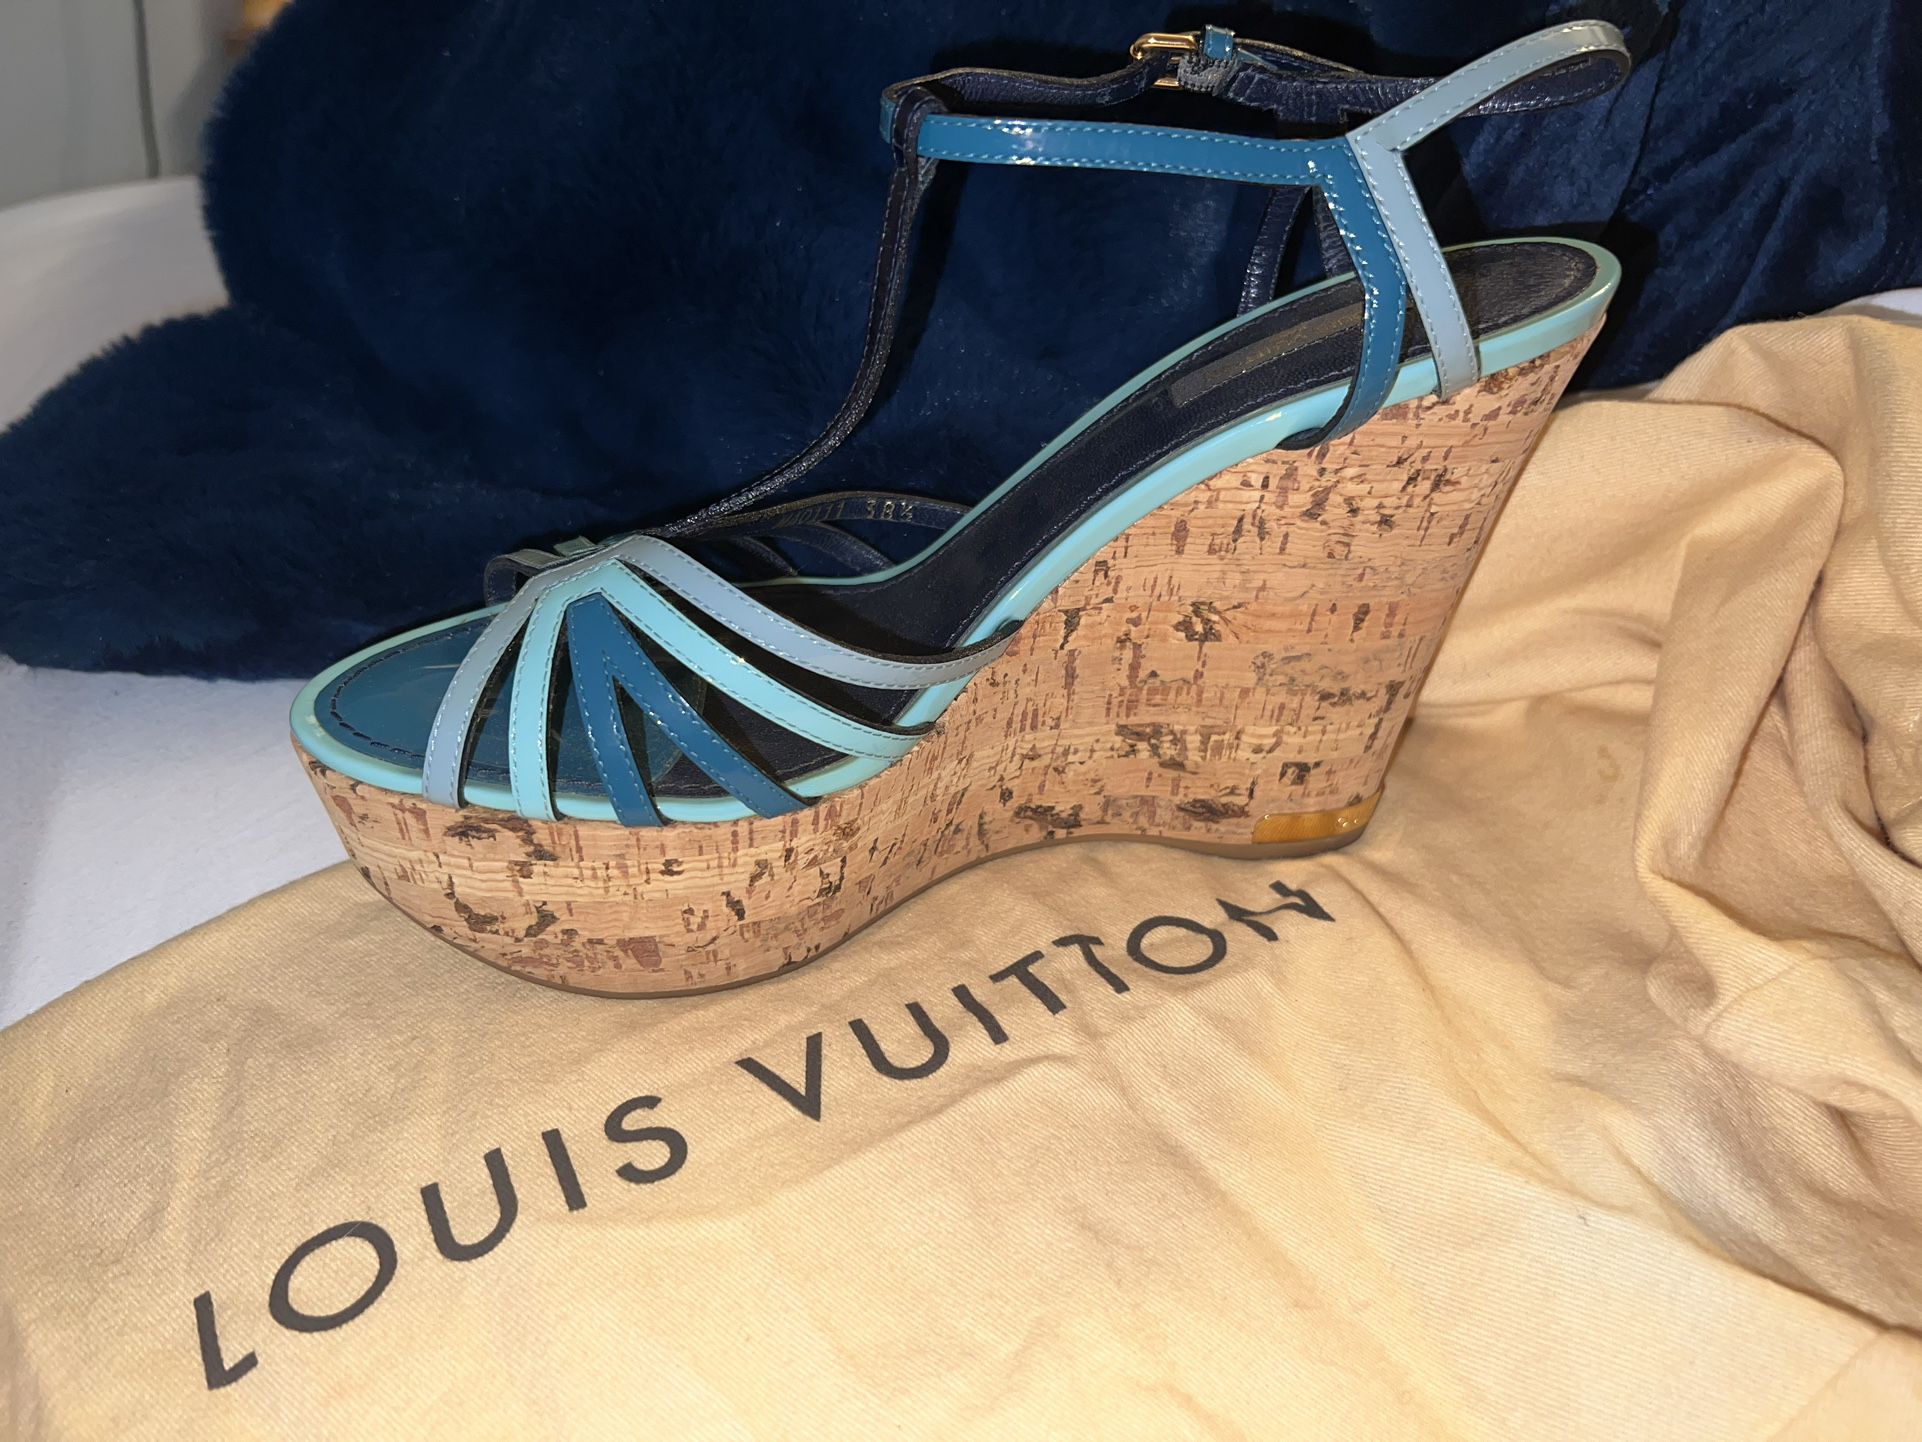 Vuitton Women's Shoes Size 7.5 for Sale in Spring Valley, CA - OfferUp